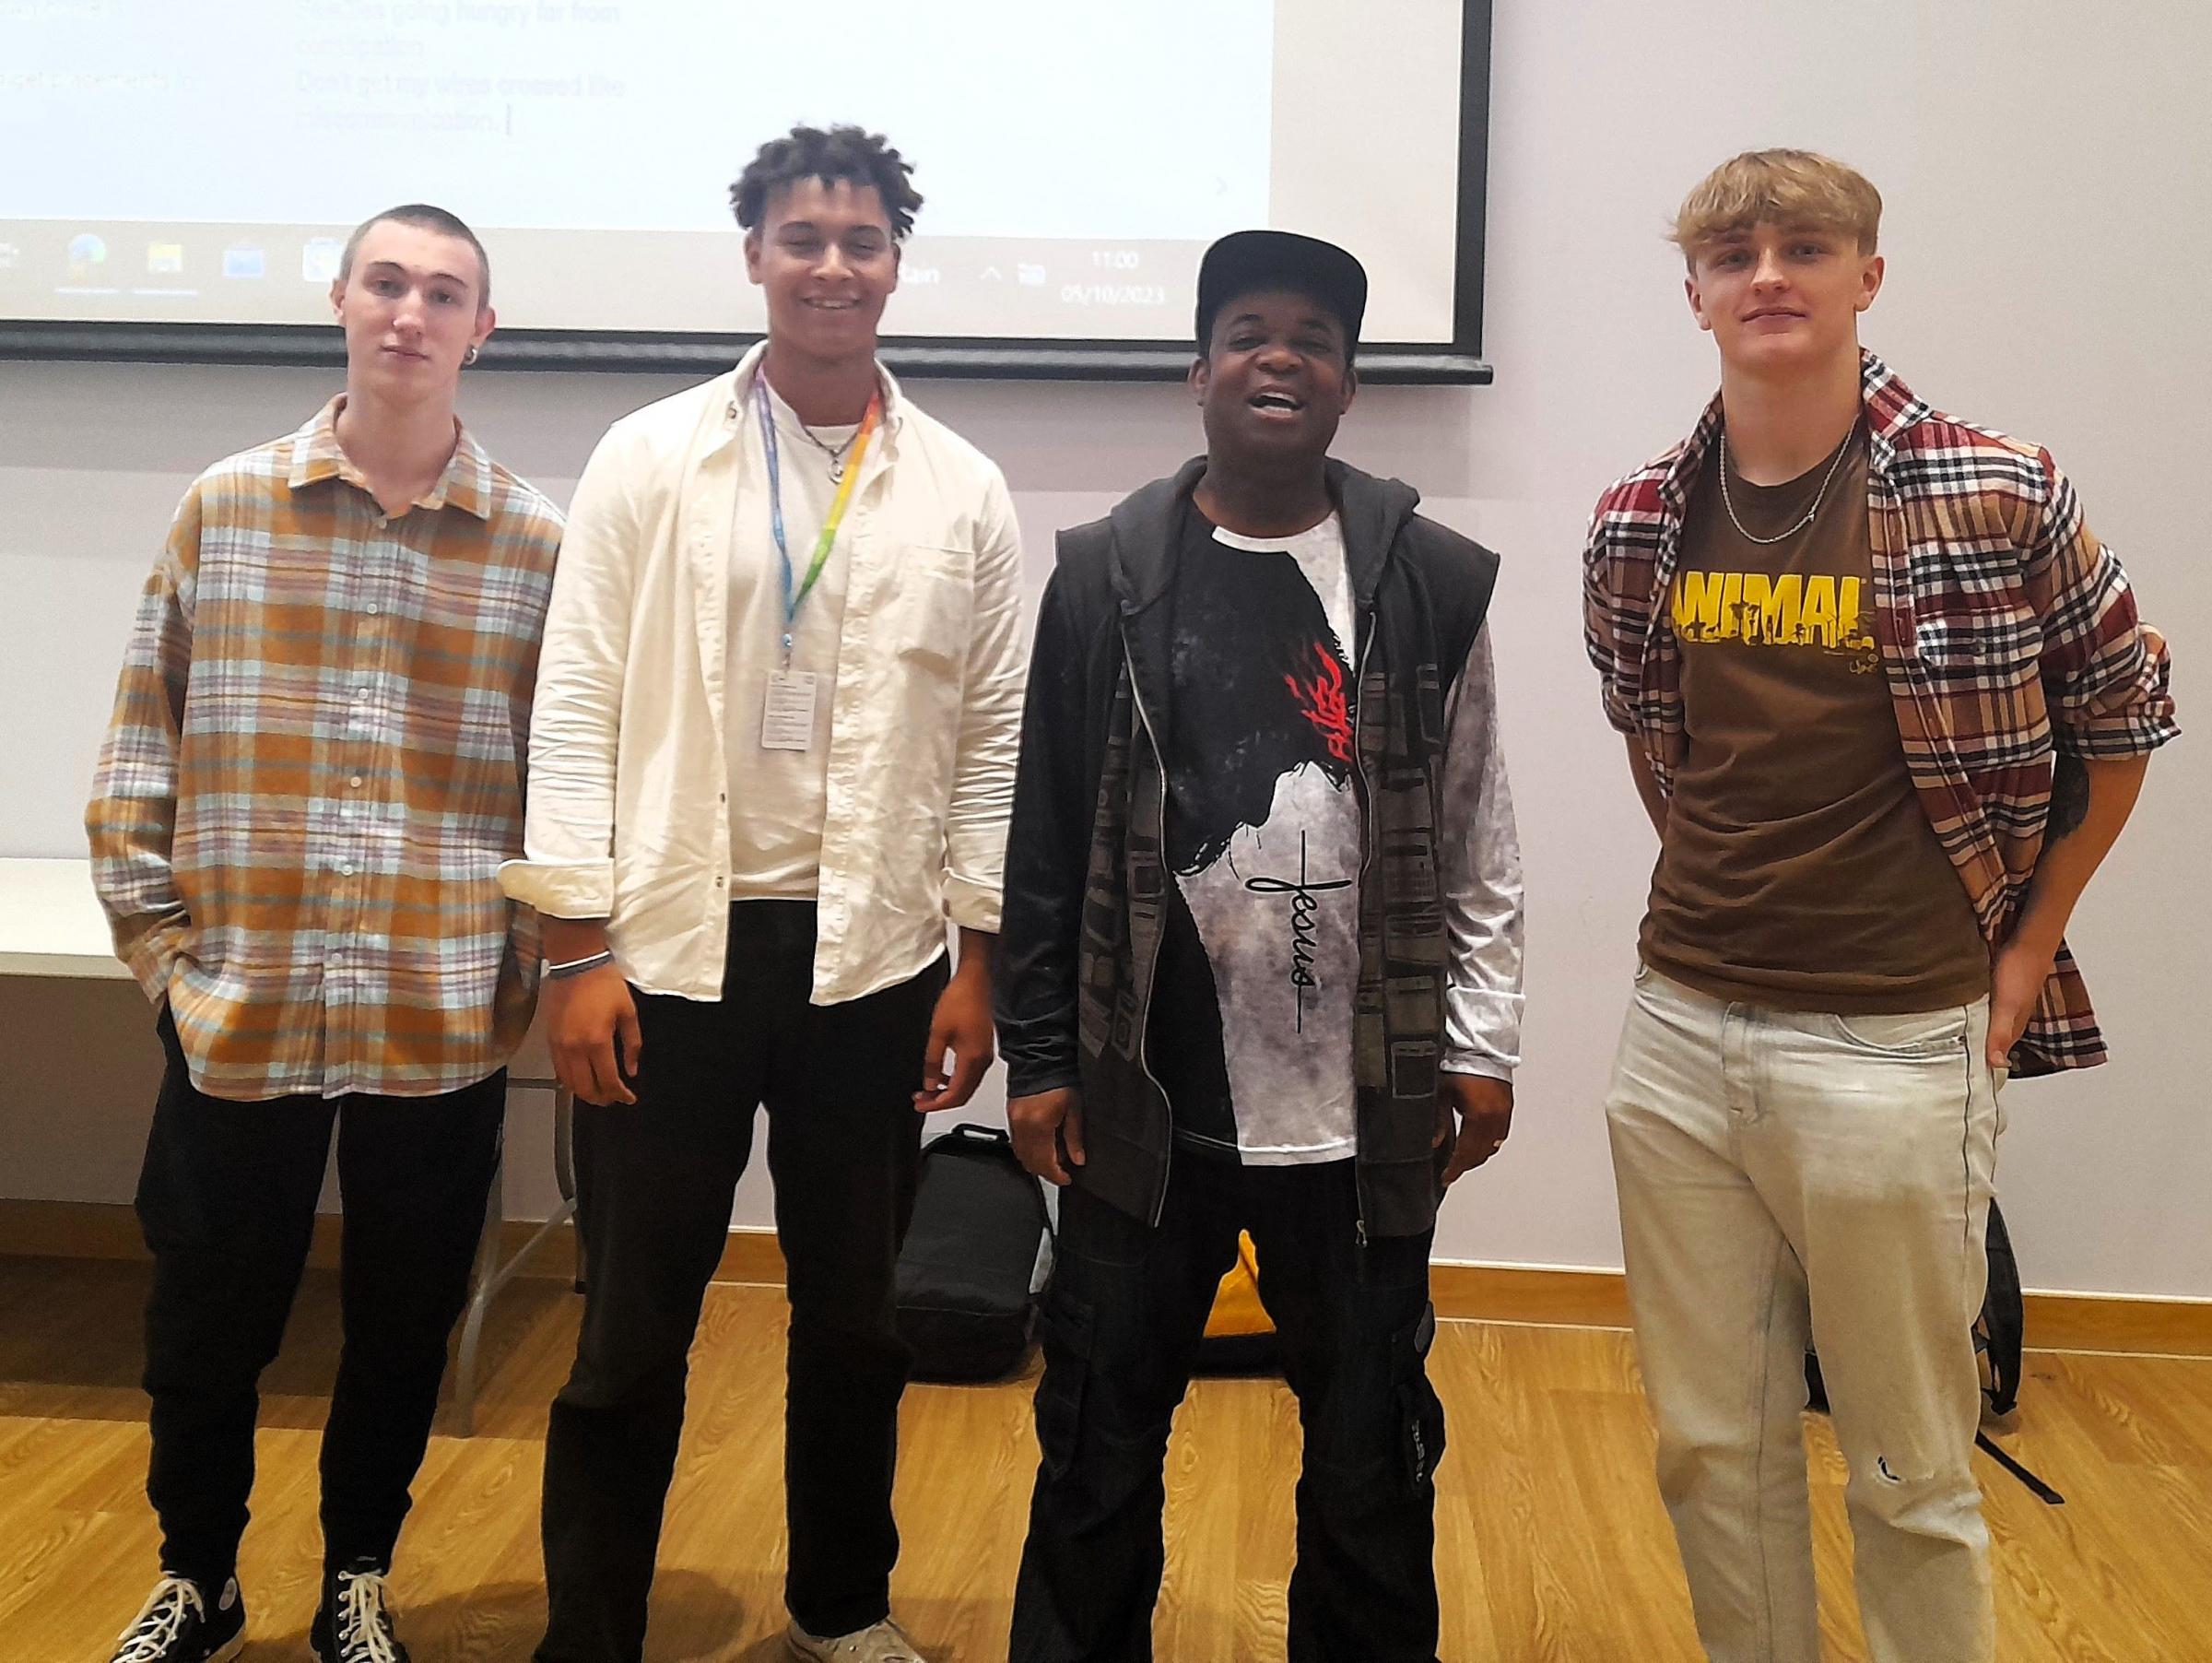 Students with Big Ideas Wales mentor Joseph George - AKA Joey G, at a rap workshop.